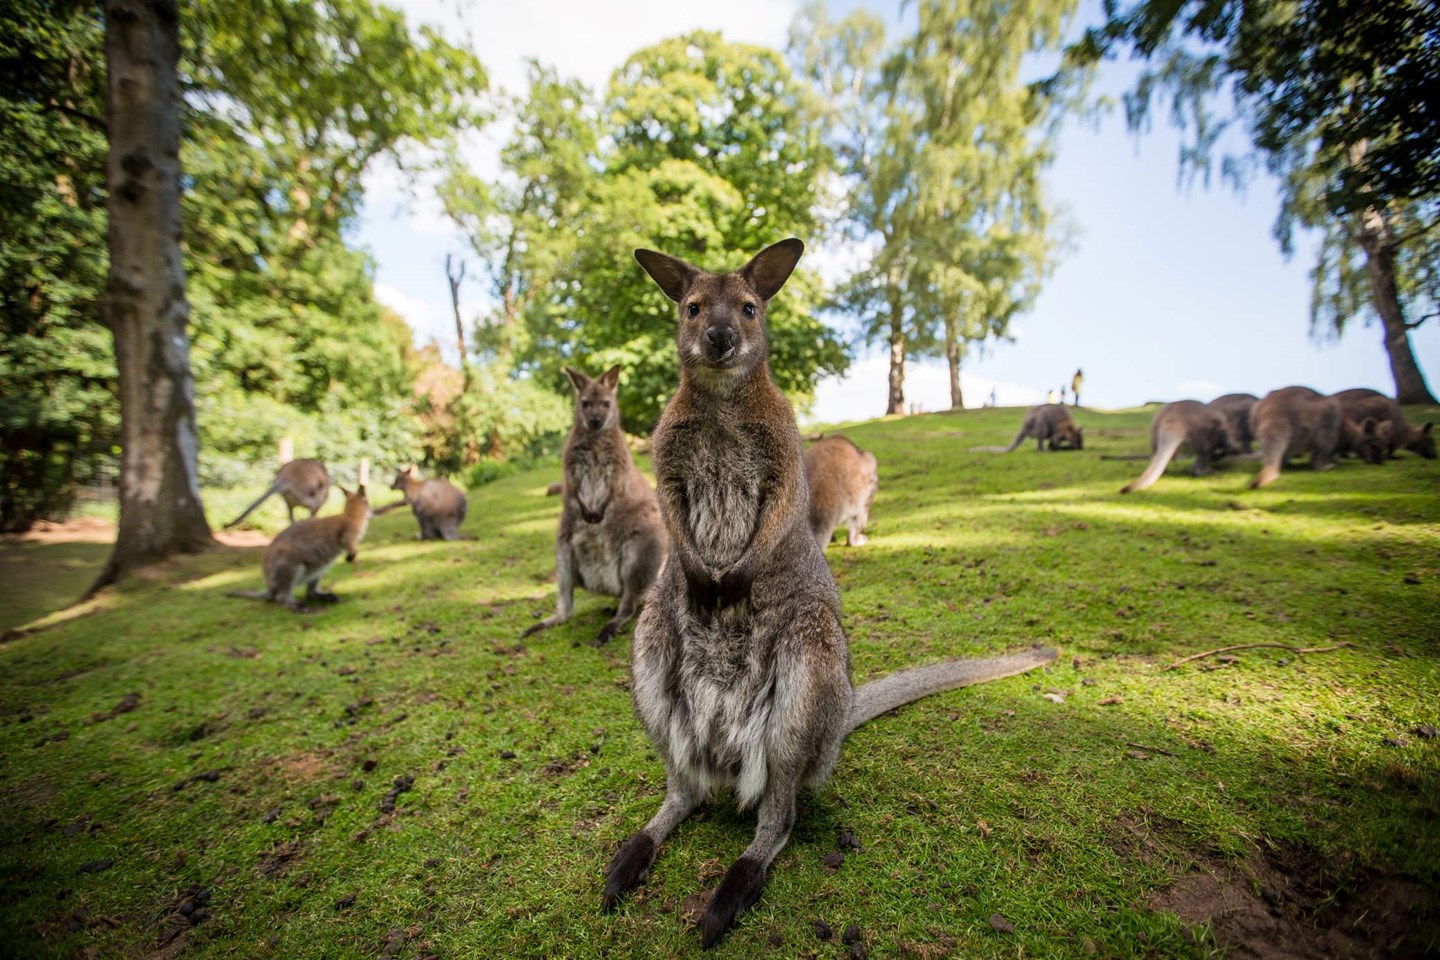 Wallaby stands on hind legs while surrounded by other wallabies in grassy enclosure 